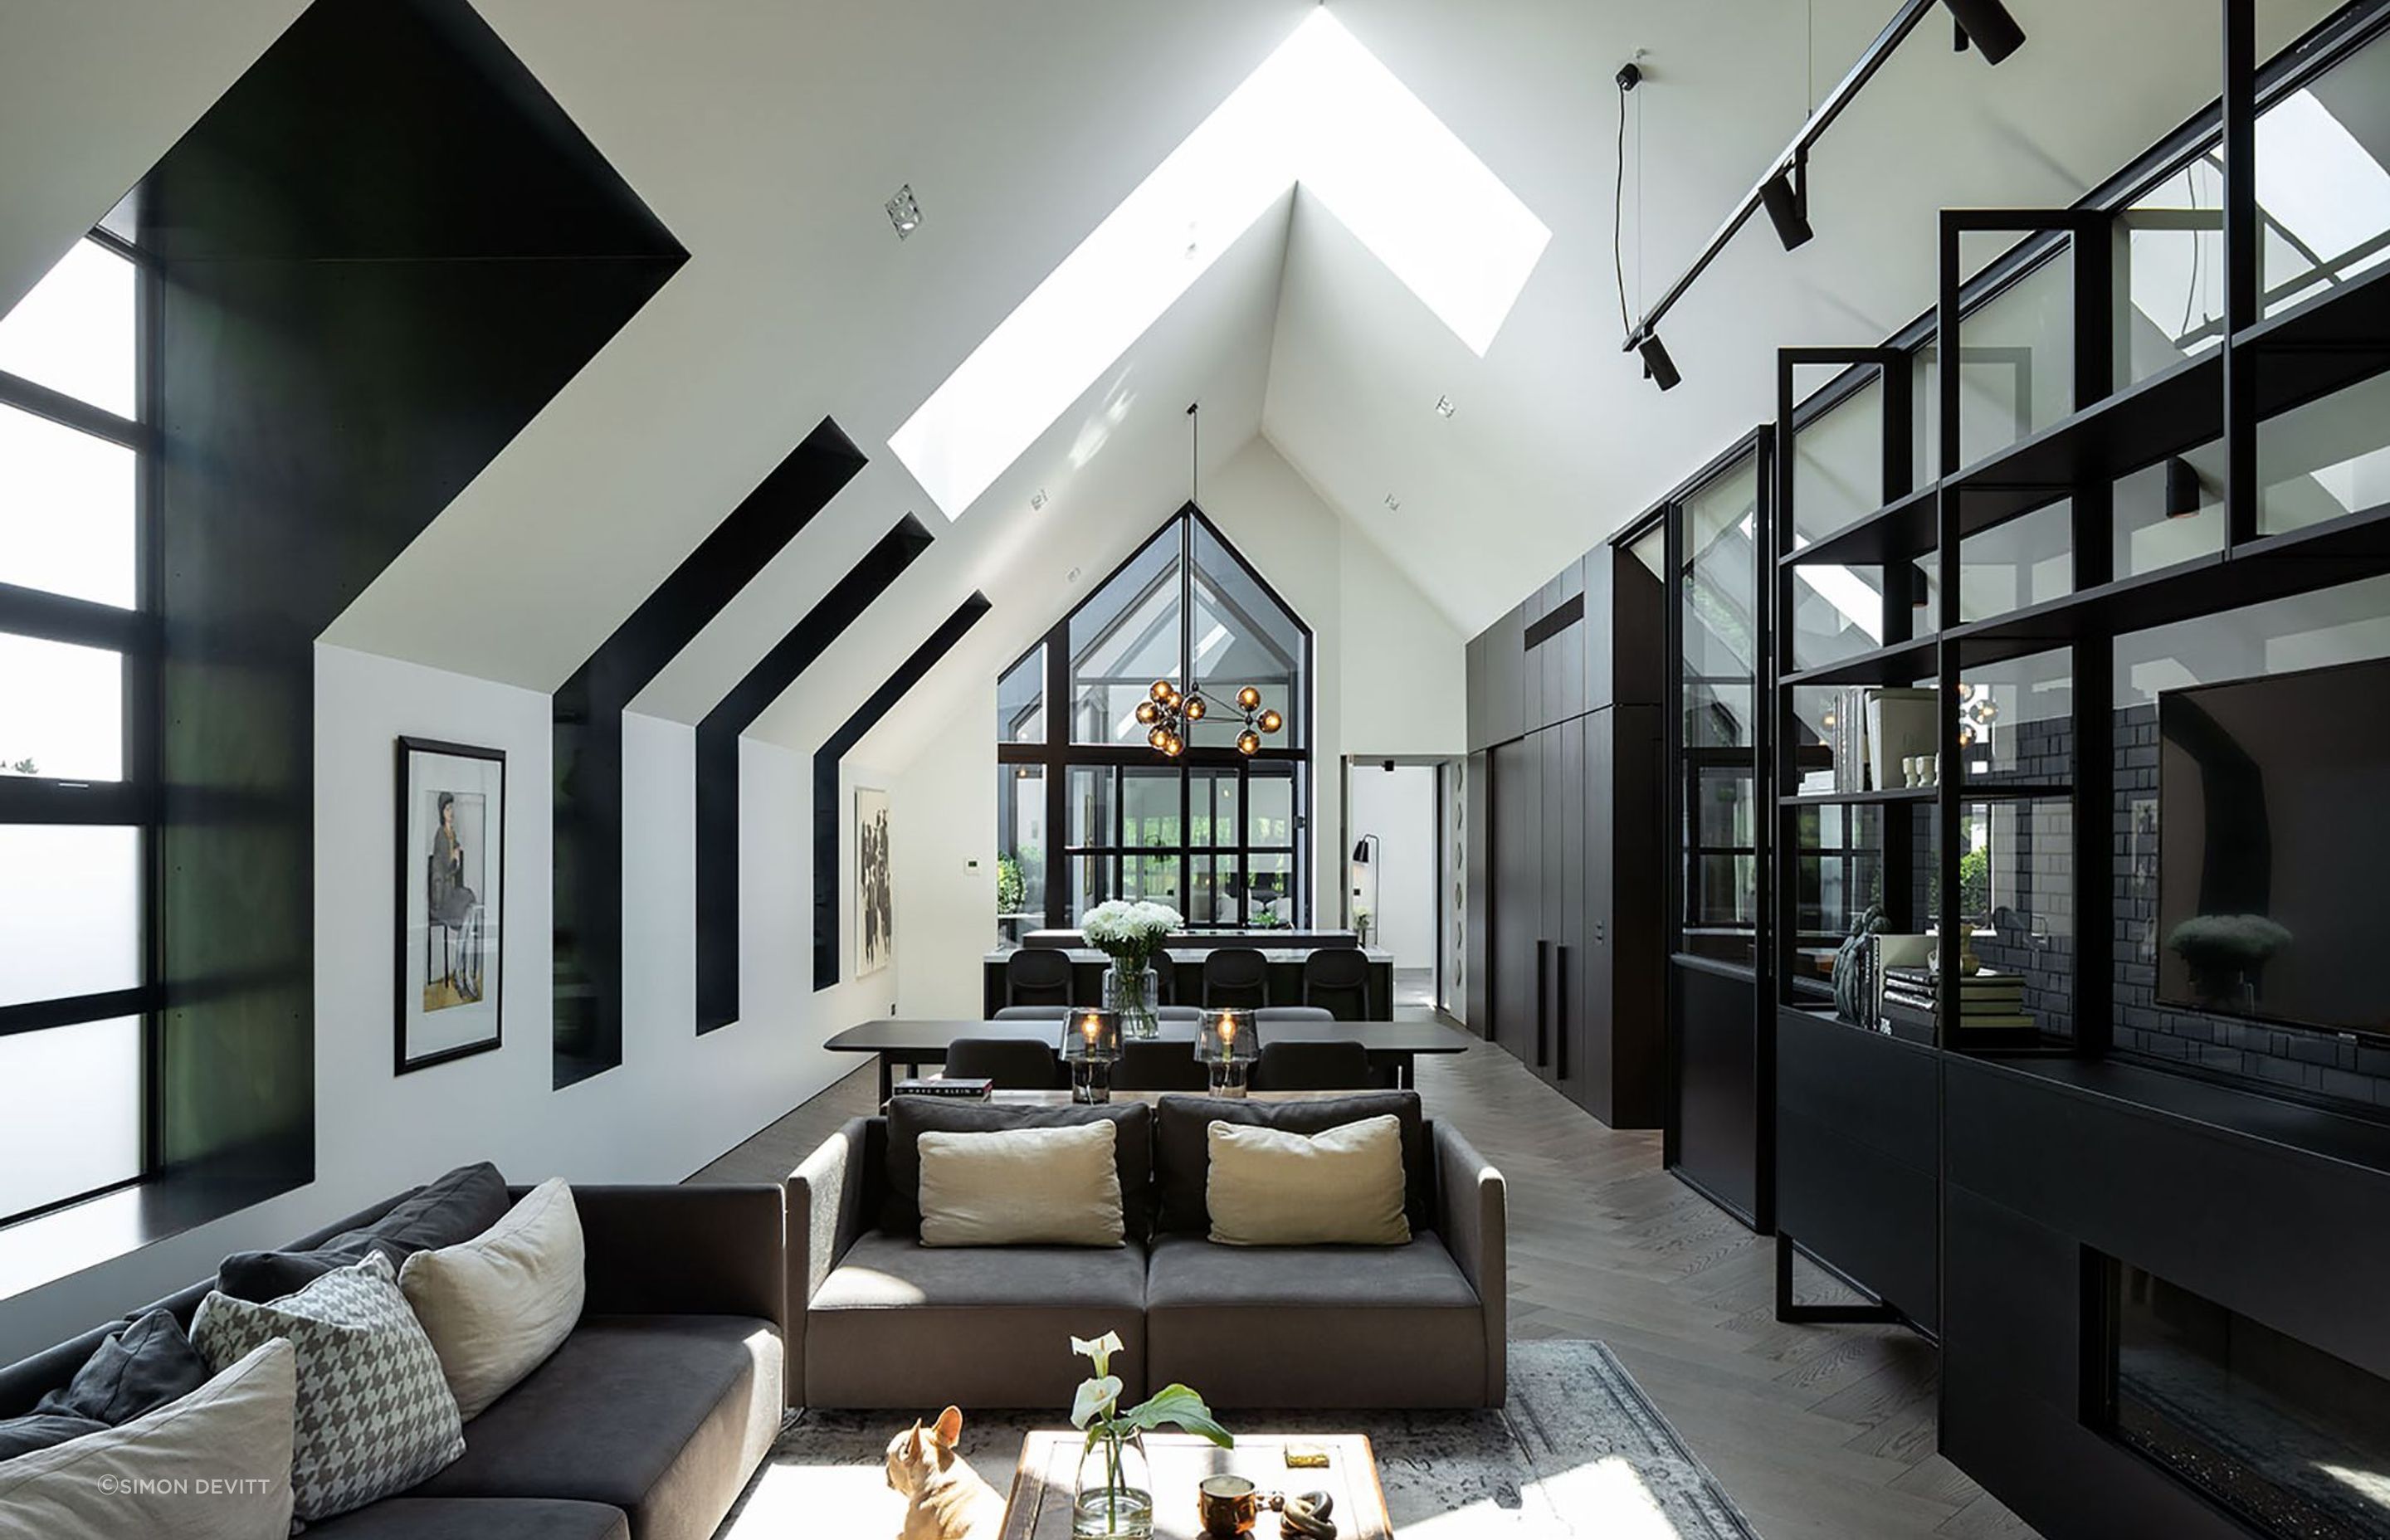 The main living area offers a heightened sense of verticality, drawing light in through a series of dormer windows and a skylight.